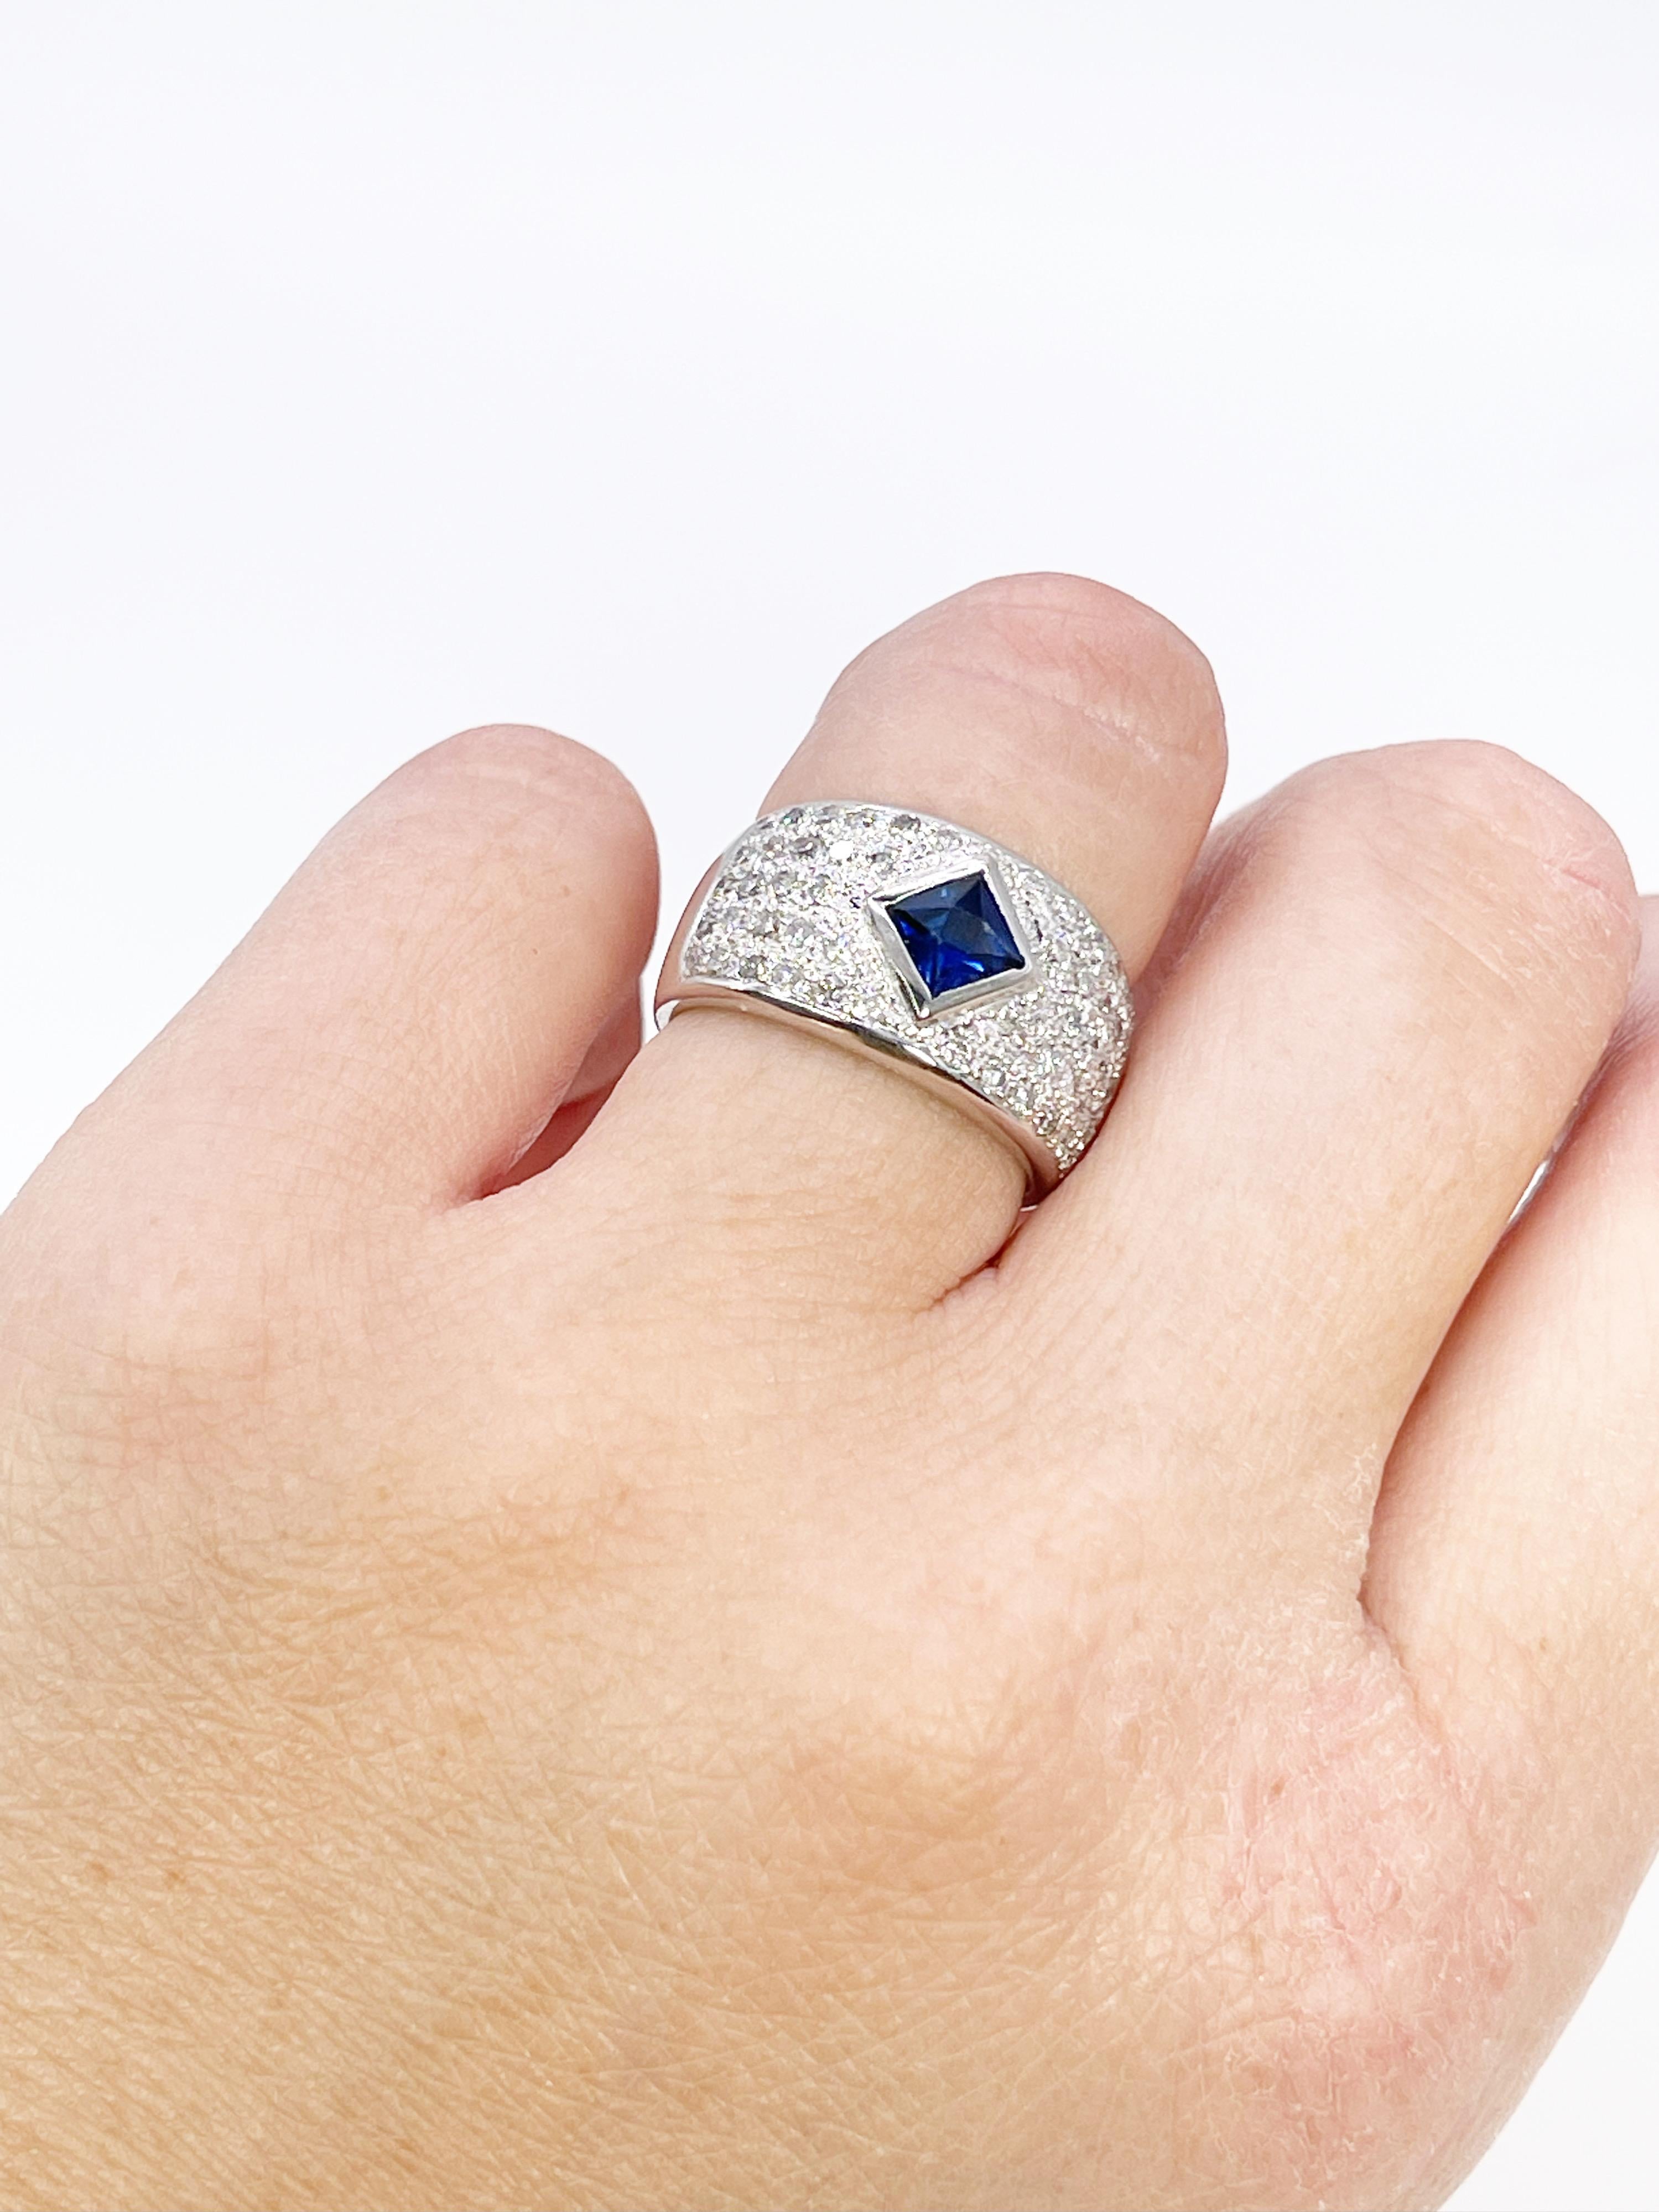 Stunning cocktail ring in 18KT white gold, made with natural diamonds and sapphire.

GRAM WEIGHT: 8.38gr
GOLD: 18KT white gold
NATURAL SAPPHIRE
Cut: Square
Color: Blue
Clarity: Slightly Included
Carat:1.20ct

NATURAL DIAMOND(S)
Cut: Round